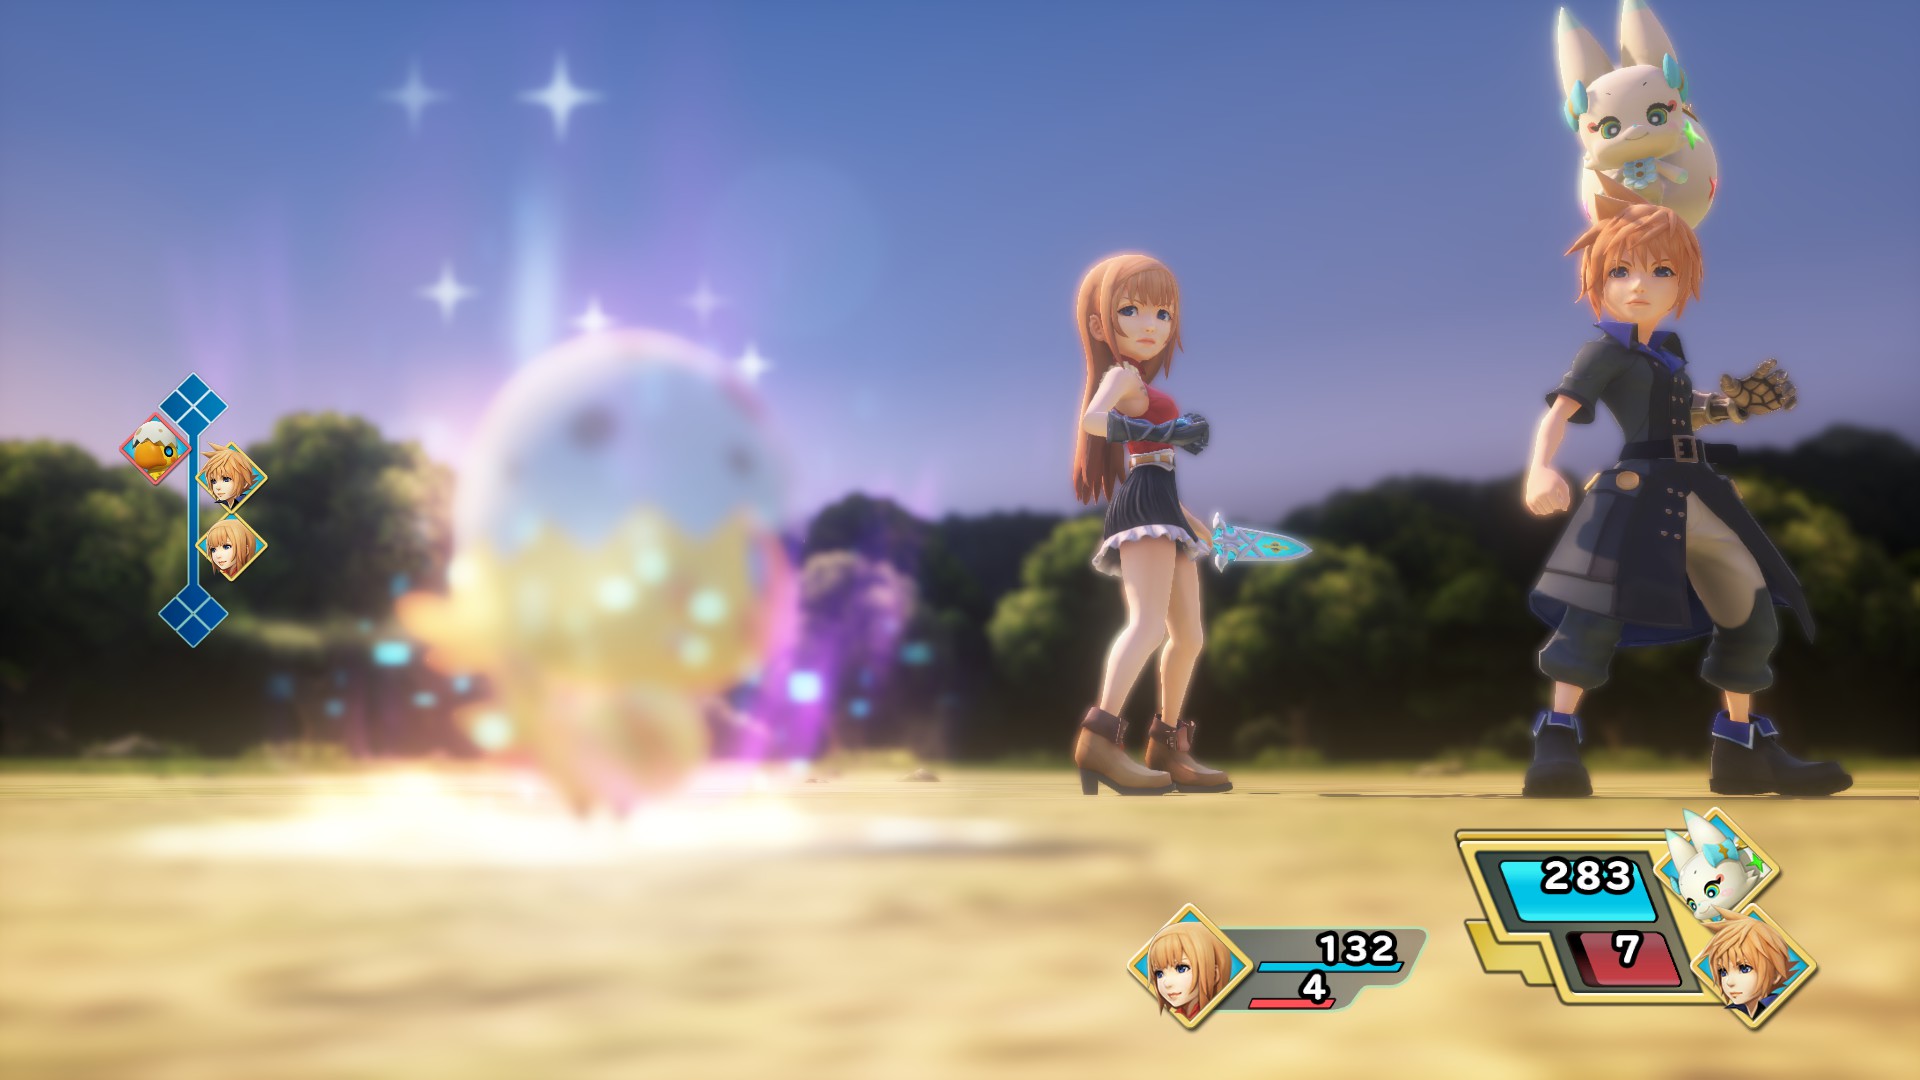 World Of Final Fantasy’s Meagre PC Port Comes With Some Powerful Cheats